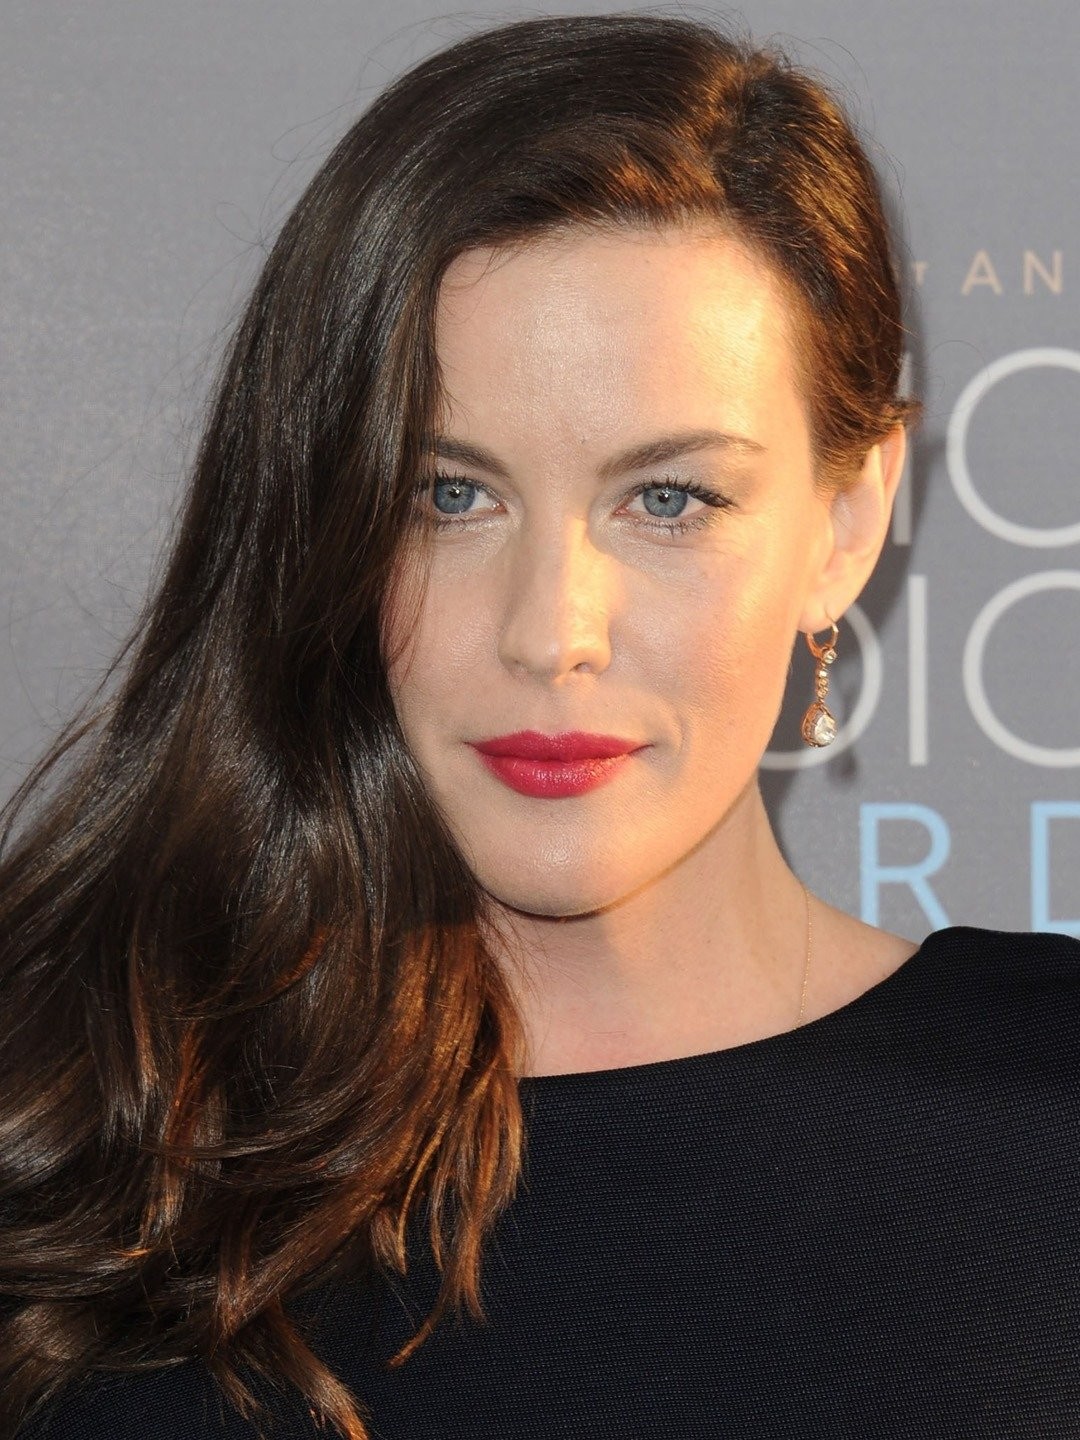 How Liv Tyler discovered Steven Tyler was her father.